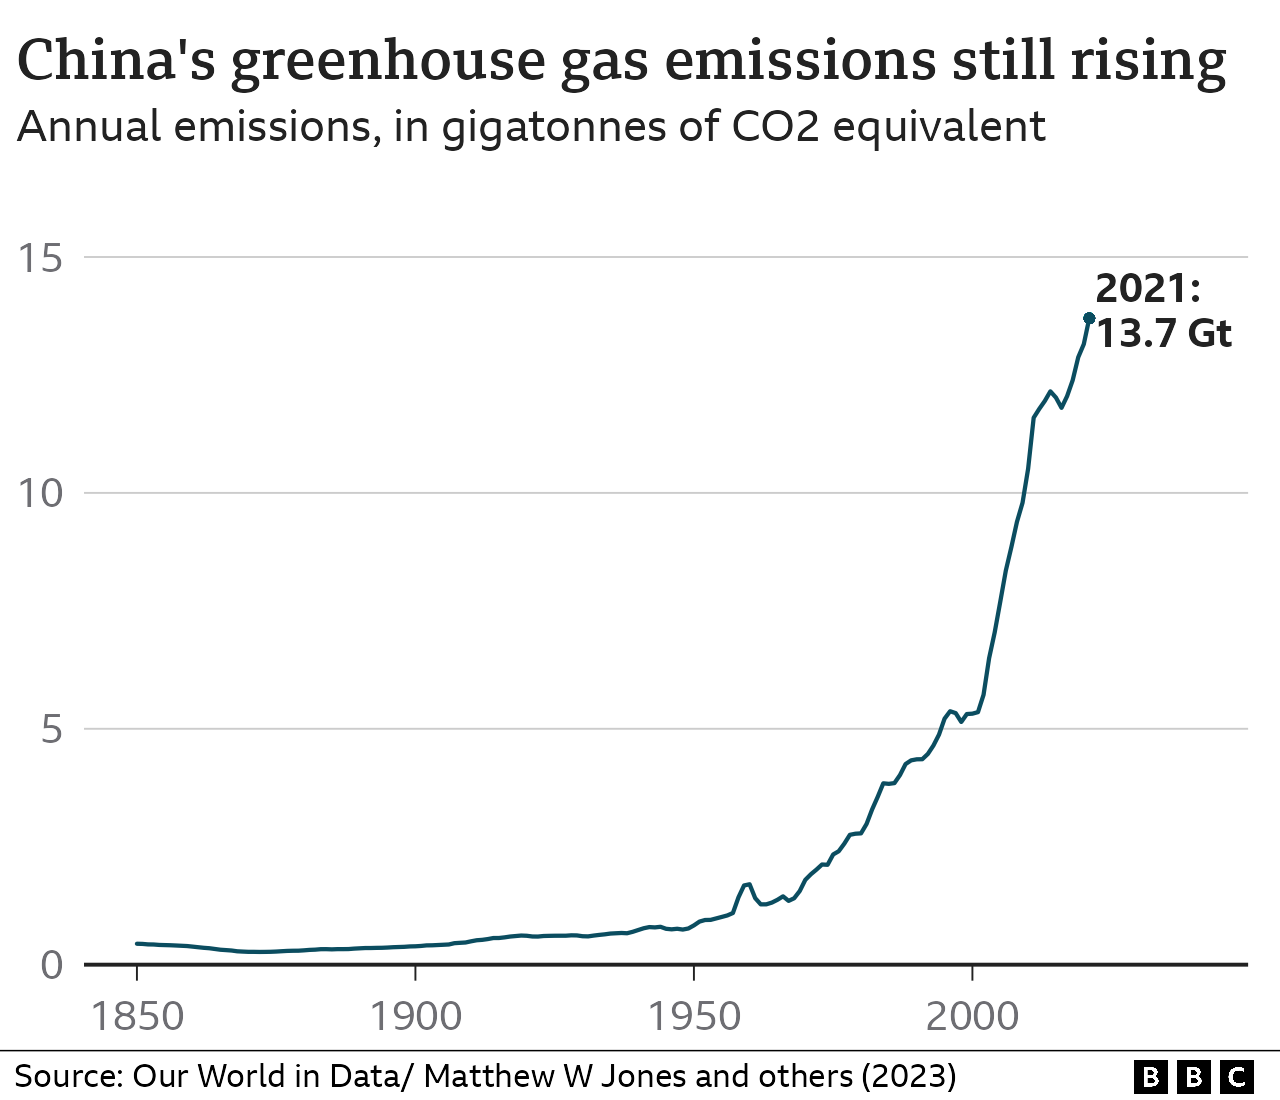 China's greenhouse gas emissions are still rising